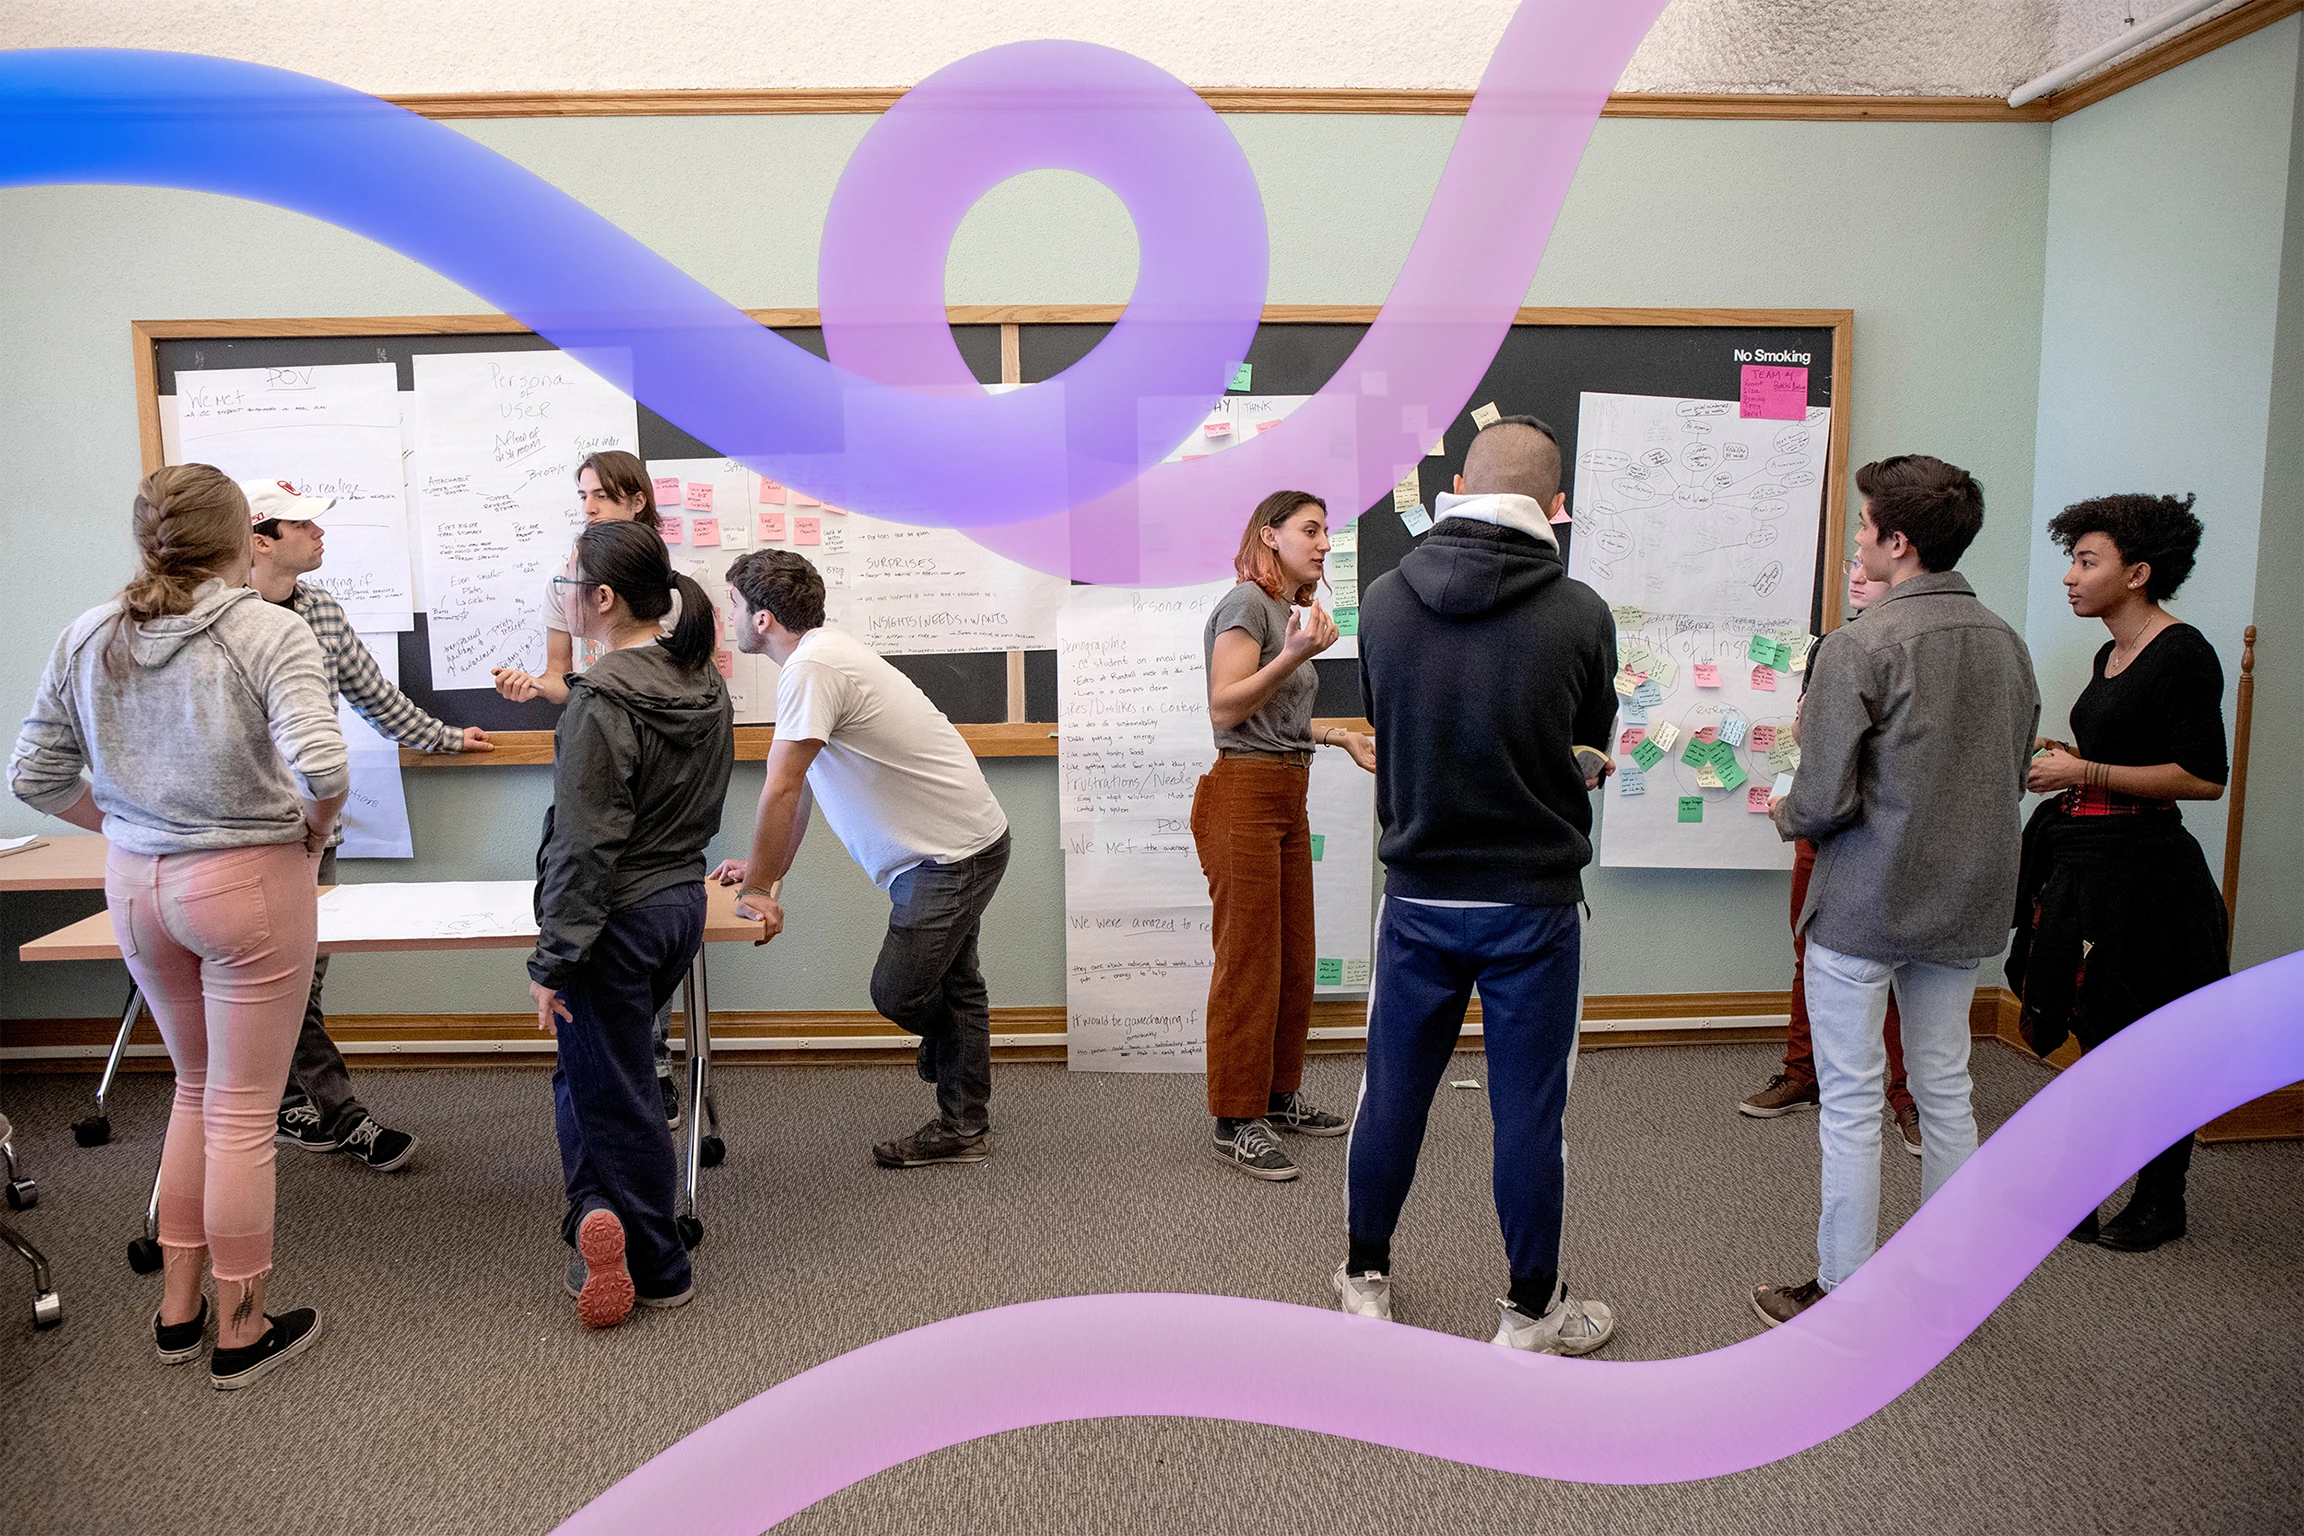 In a campus classroom, college students ideate in small groups with paper and notes hanging on the walls and chalkboards